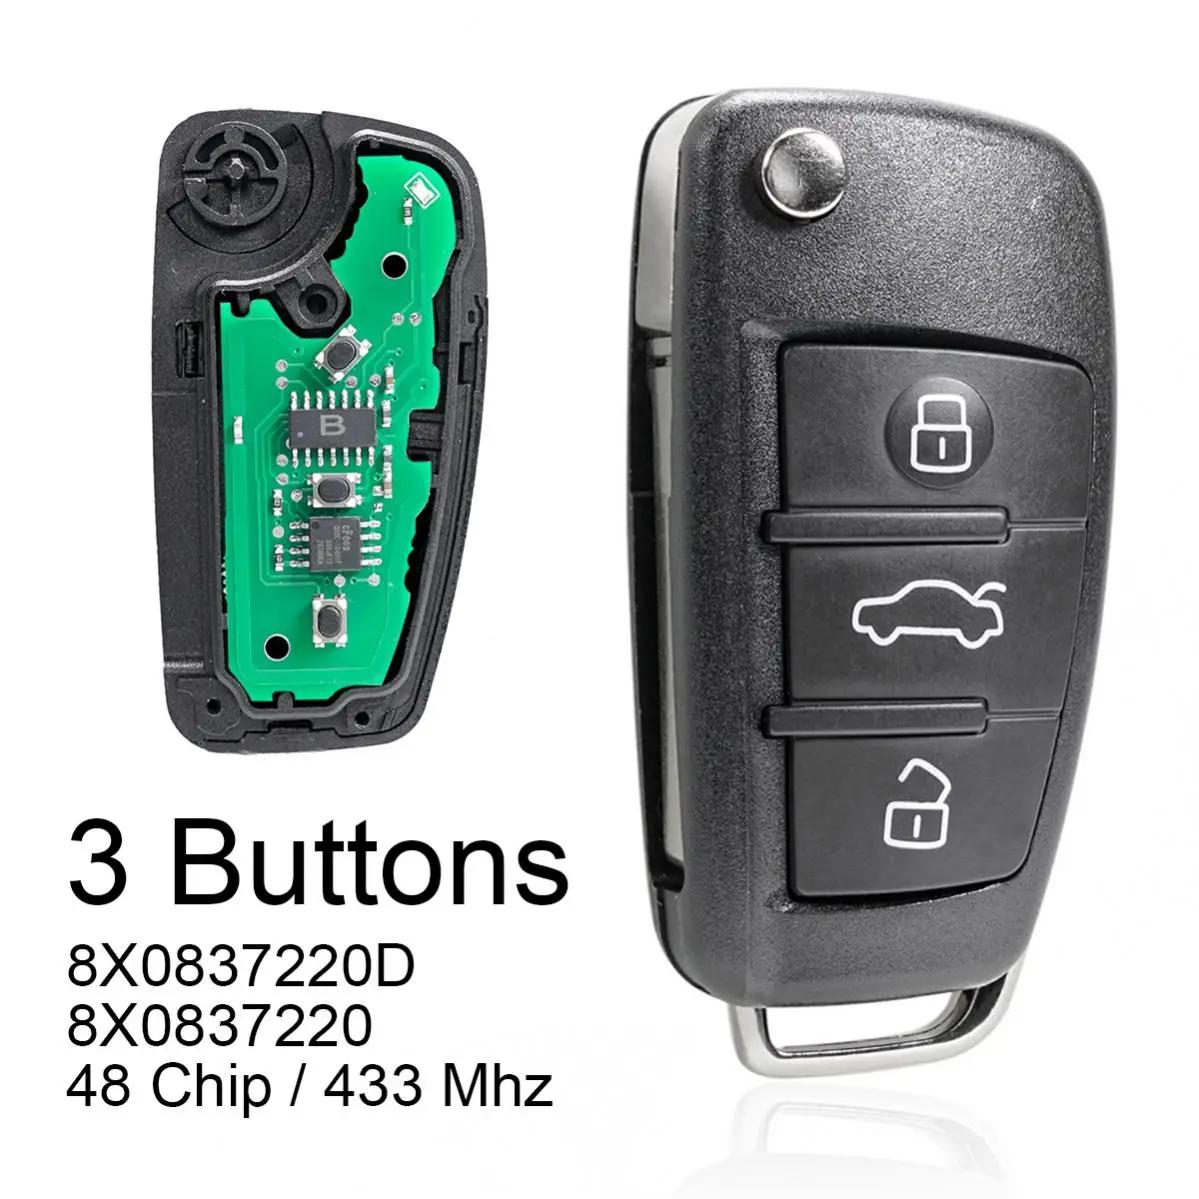 433Mhz 3 Buttons Car Remote Key with ID48 Chip /8X0837220D 8X0837220 for Audi- A1 Q3 S1 2010 2011 2012 2013 2014 2015 2016 2017 jingyuqin remote car key case shell with id48 chip for vw volkswagen polo golf seat ibiza leon skoda octavia 0 buttons fob